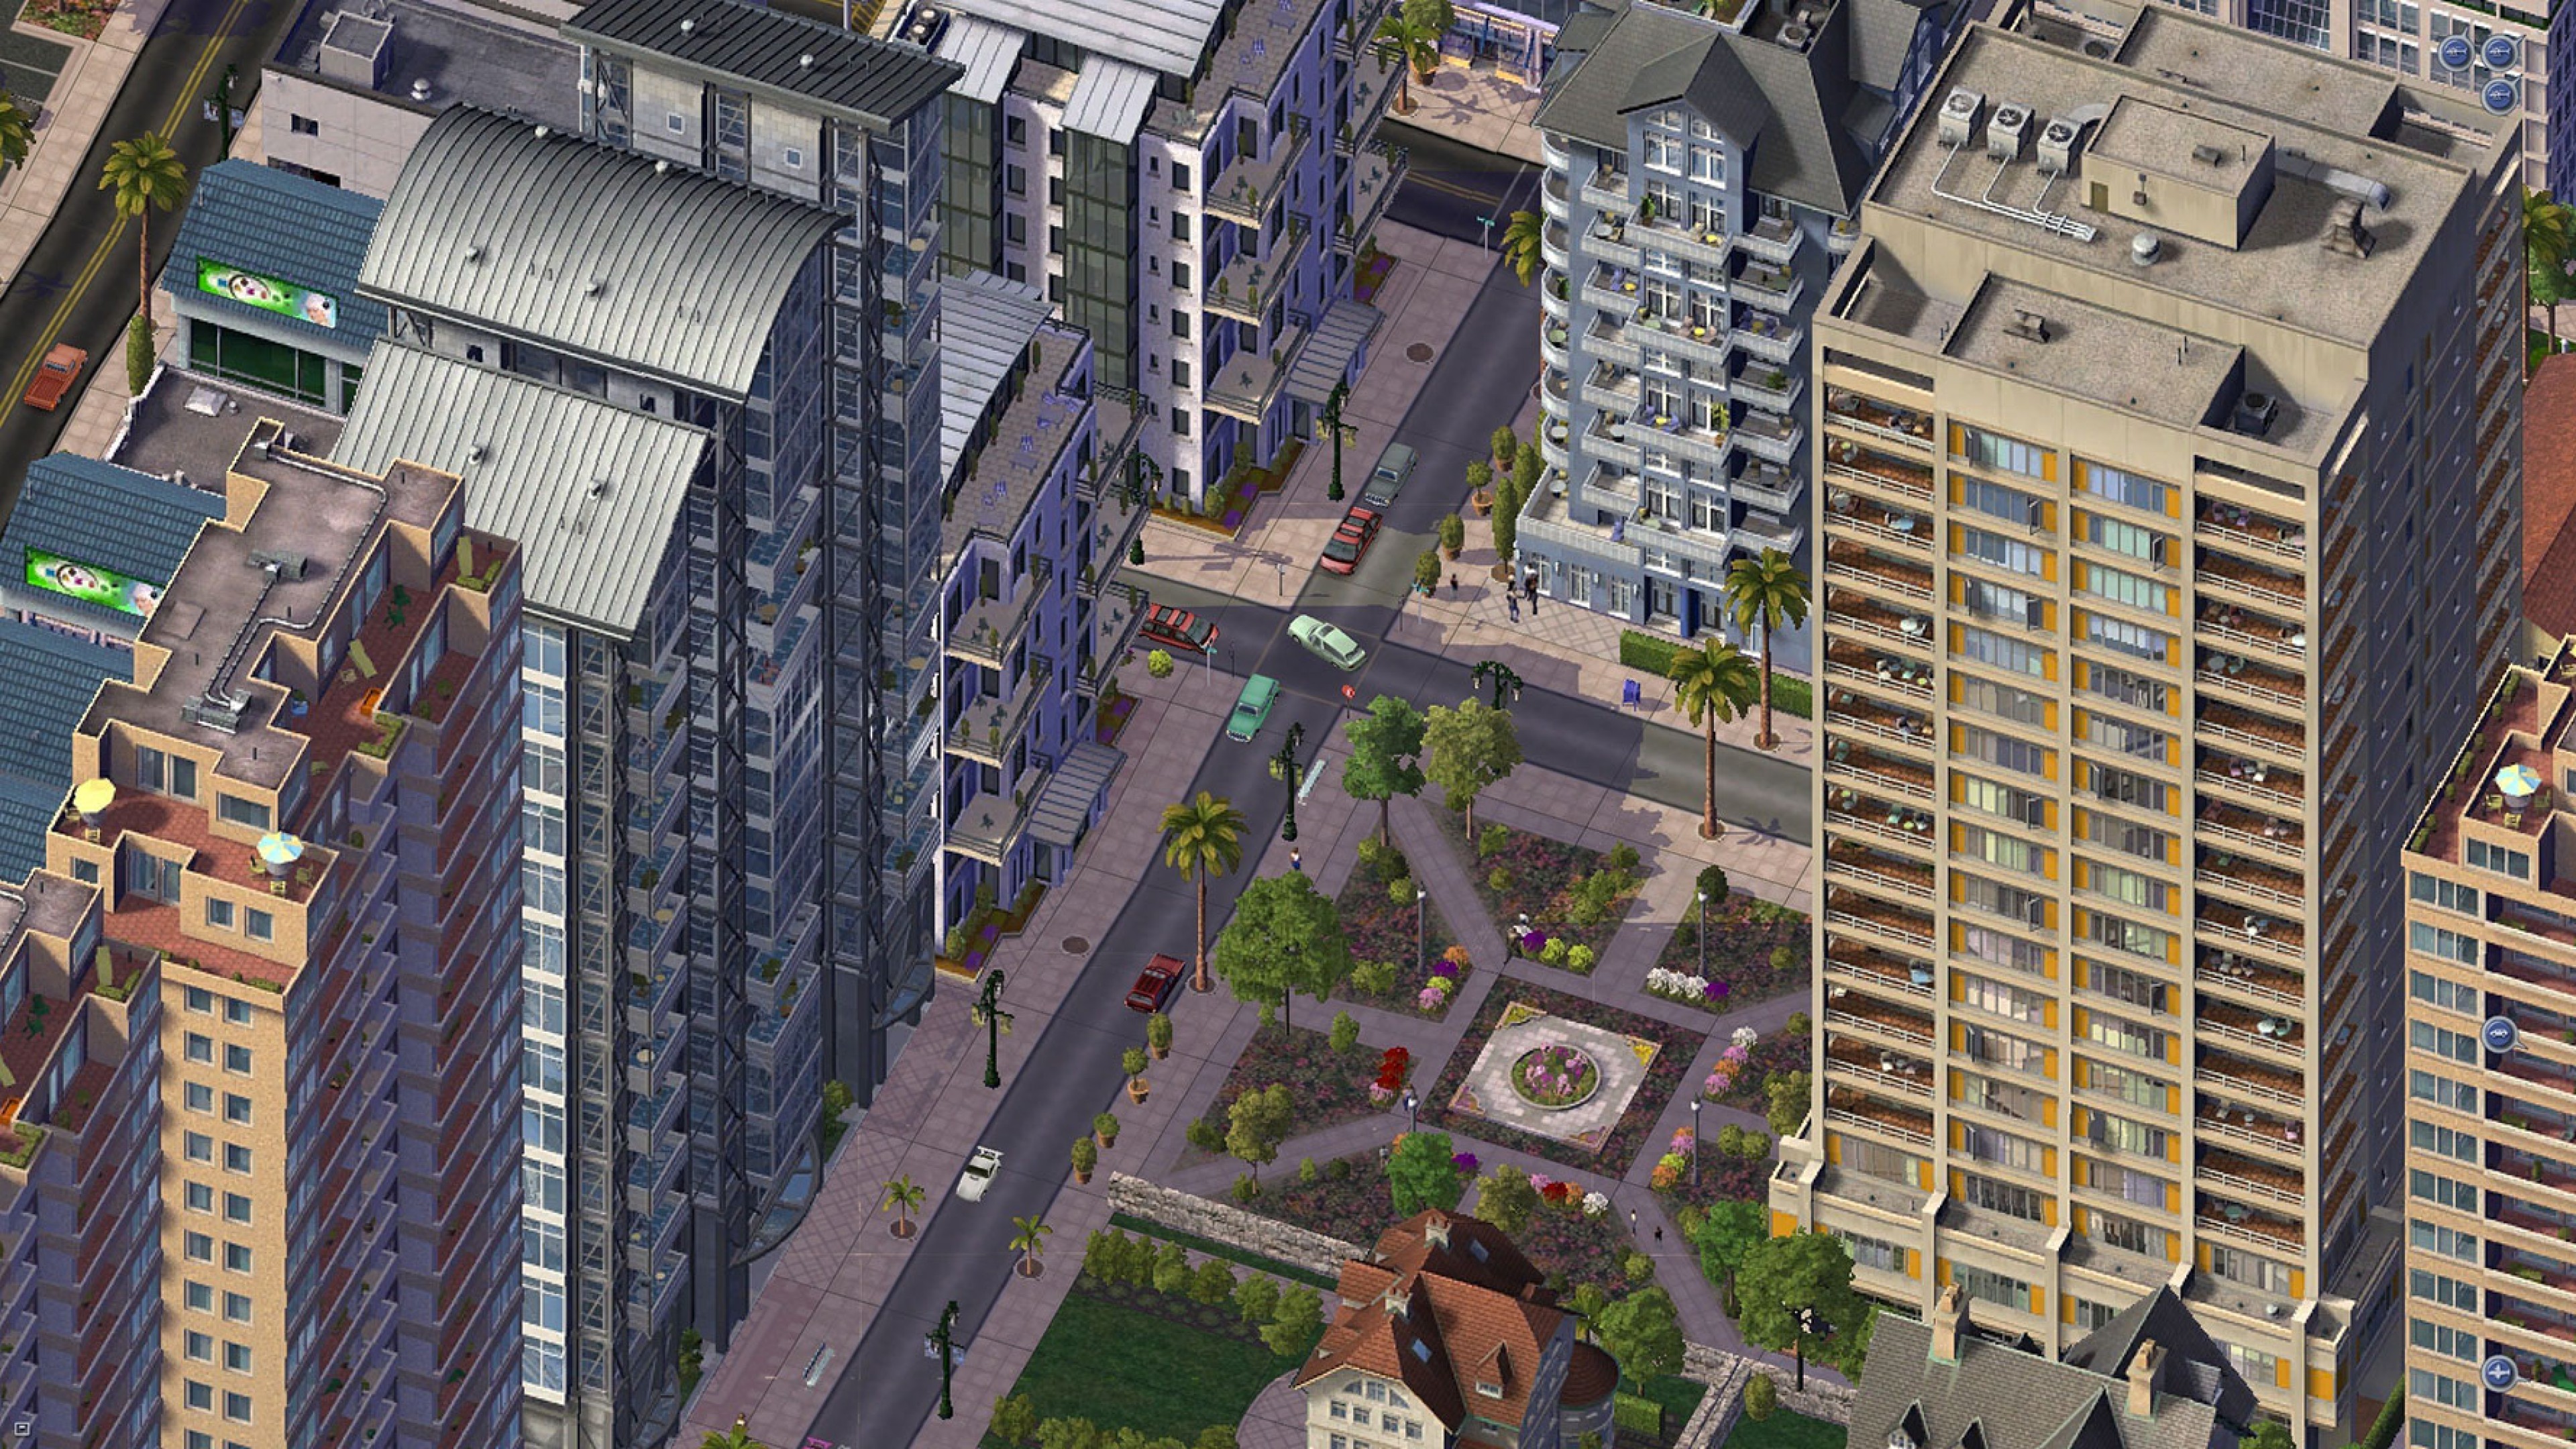 simcity 4 deluxe mod